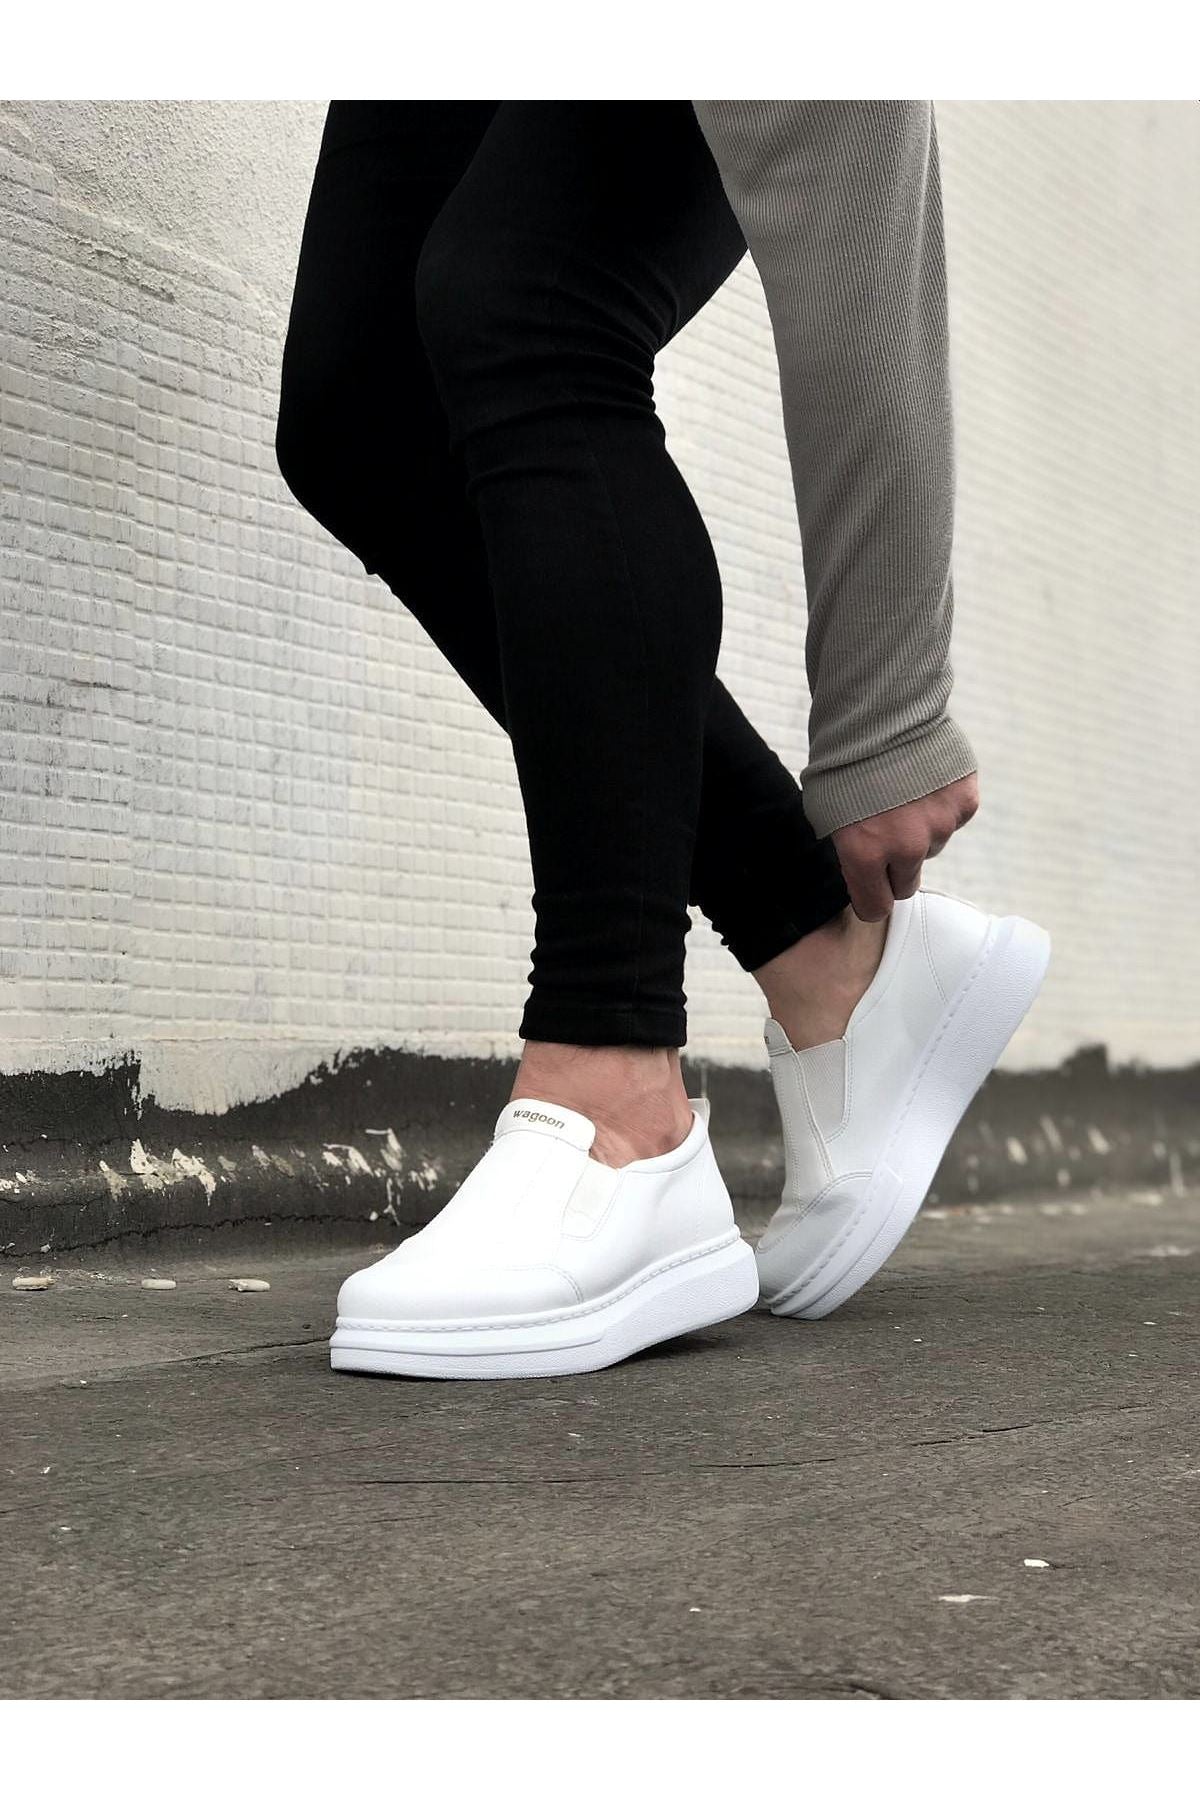 WG049 White Flat Casual Men's Shoes sneakers - STREETMODE™